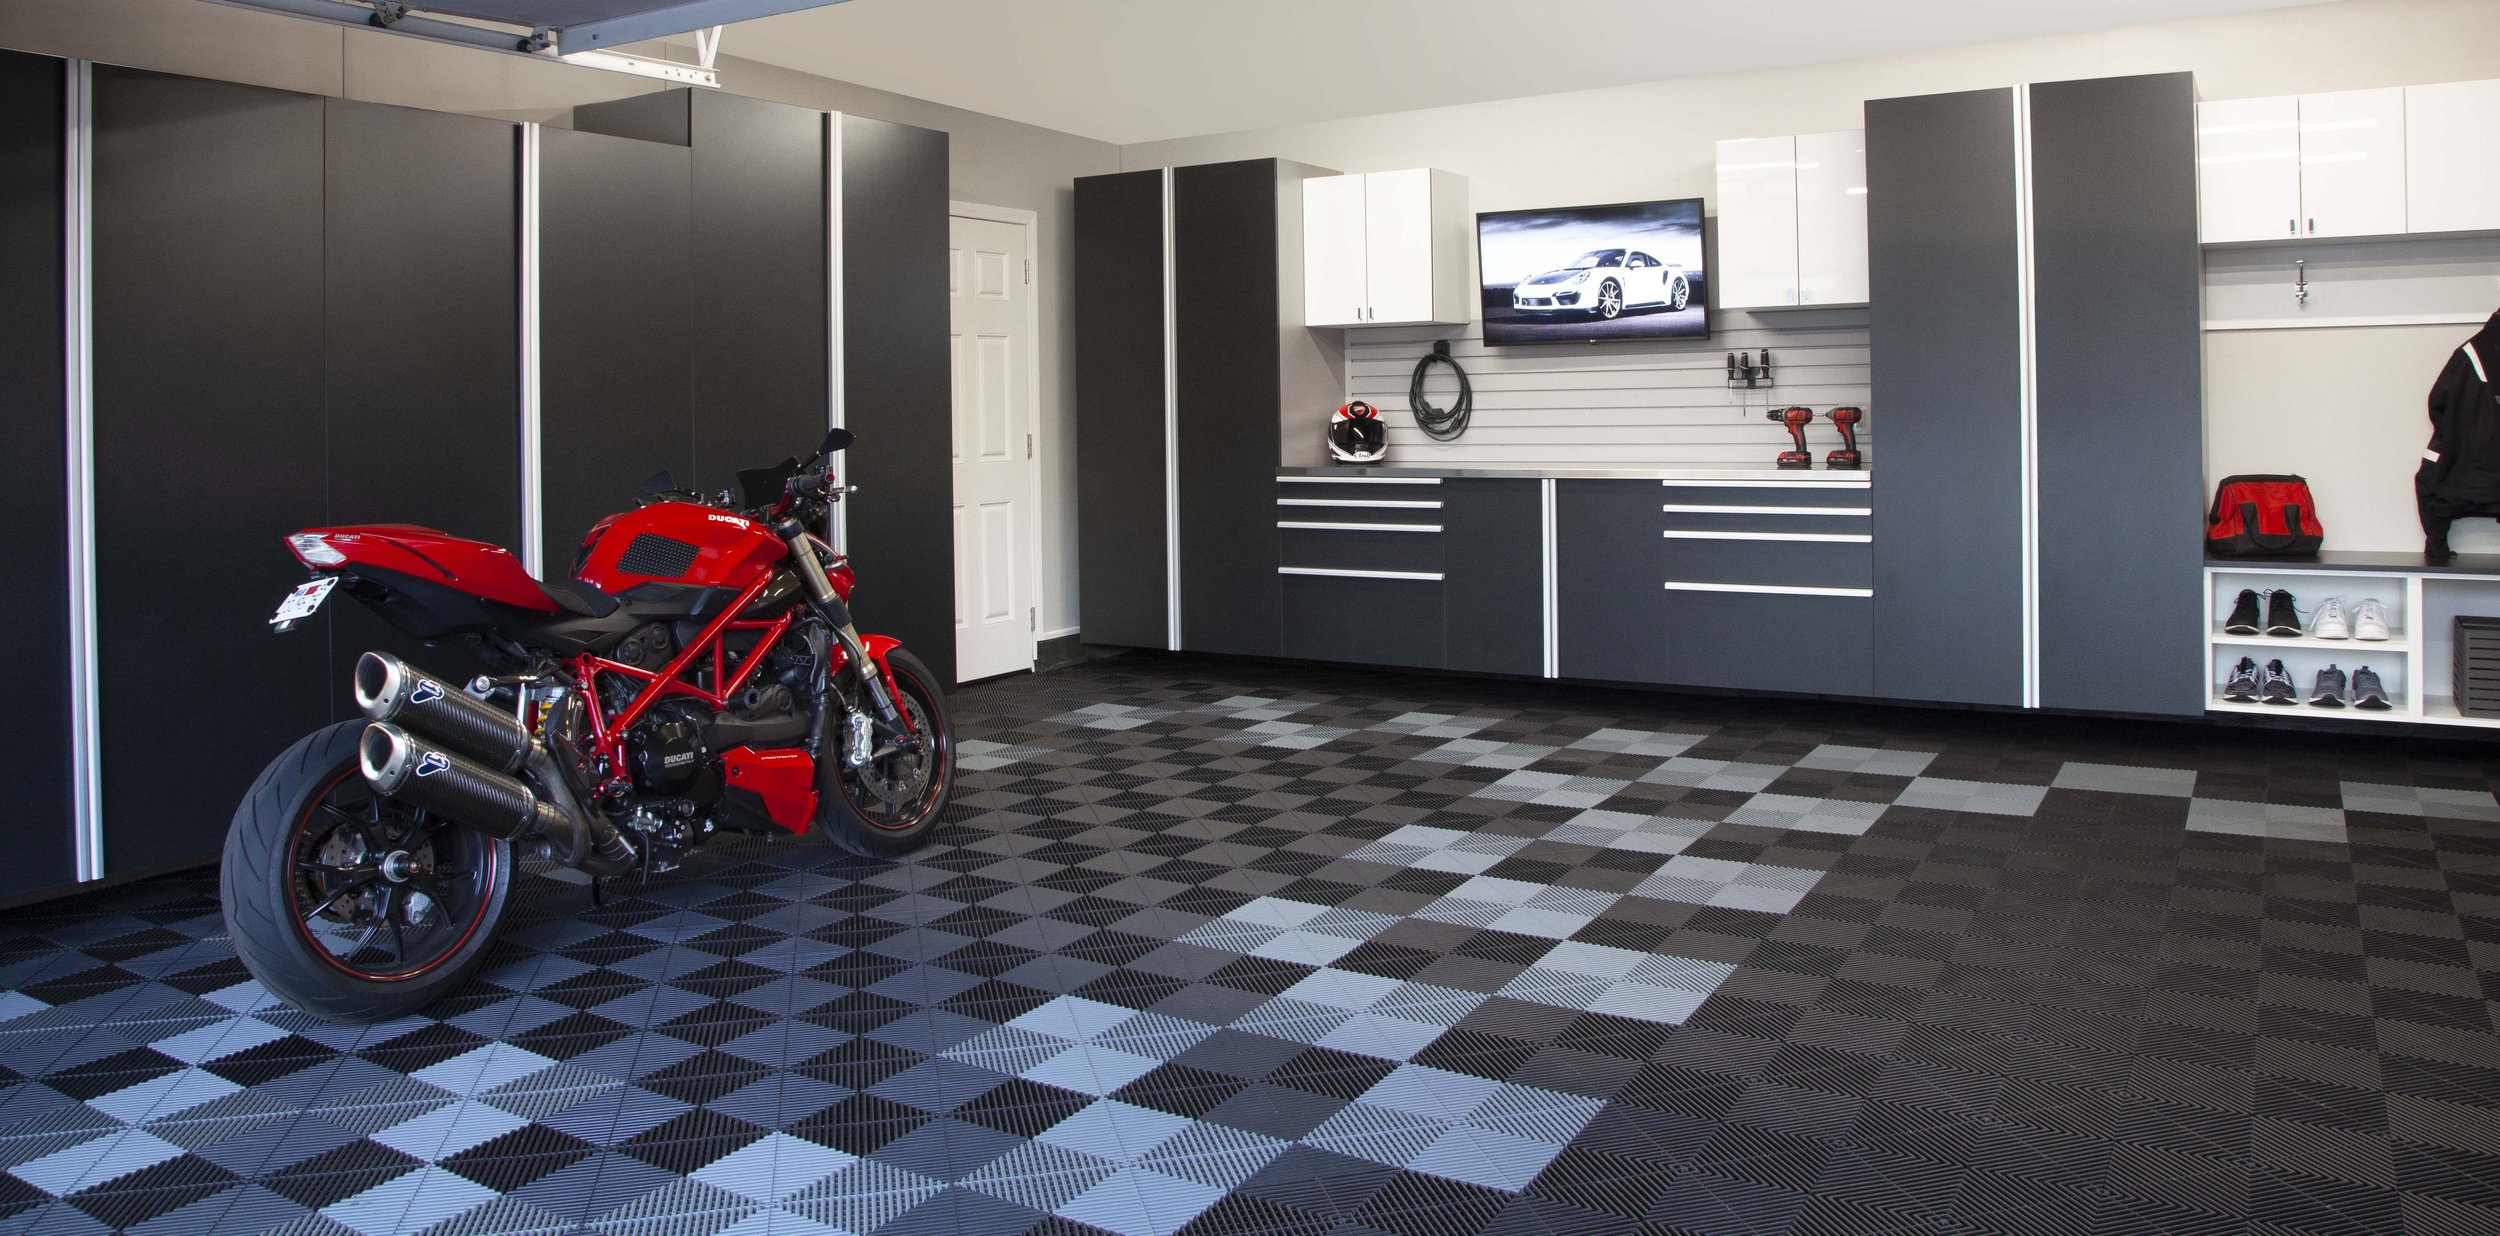 Basalt Cabinets Angle with Motorcycle Oct 2020.jpg